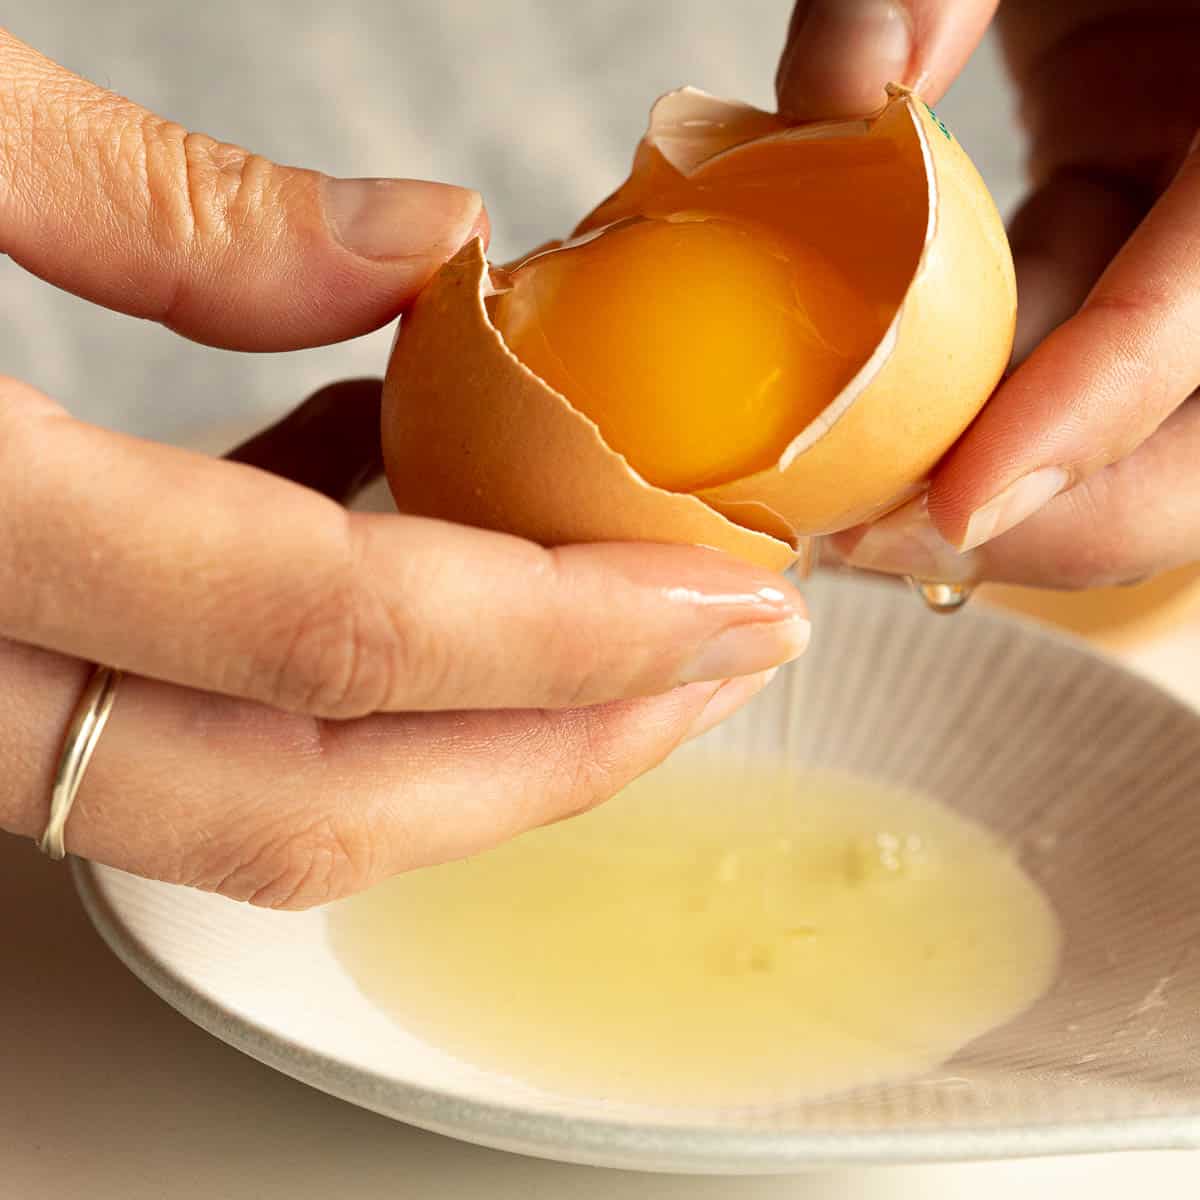 An egg yolk is held in it's shell, while the egg white drops into the dish below.